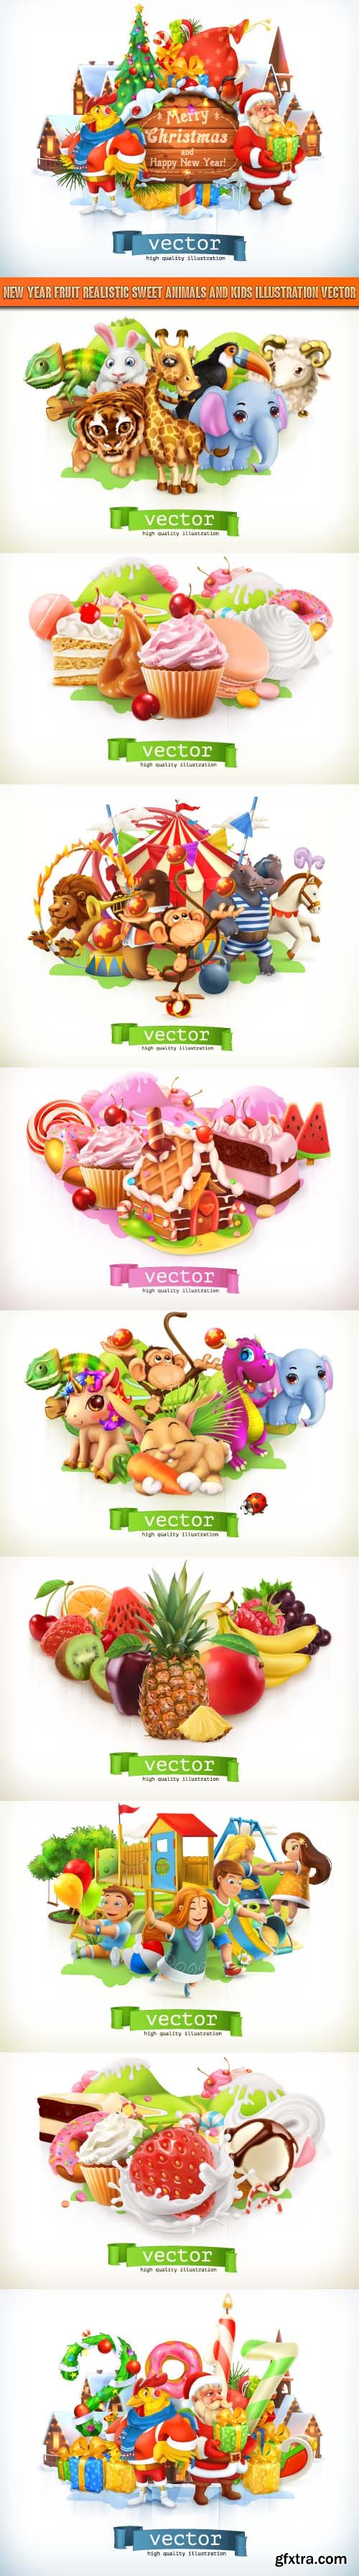 New Year fruit realistic sweet animals and kids illustration vector